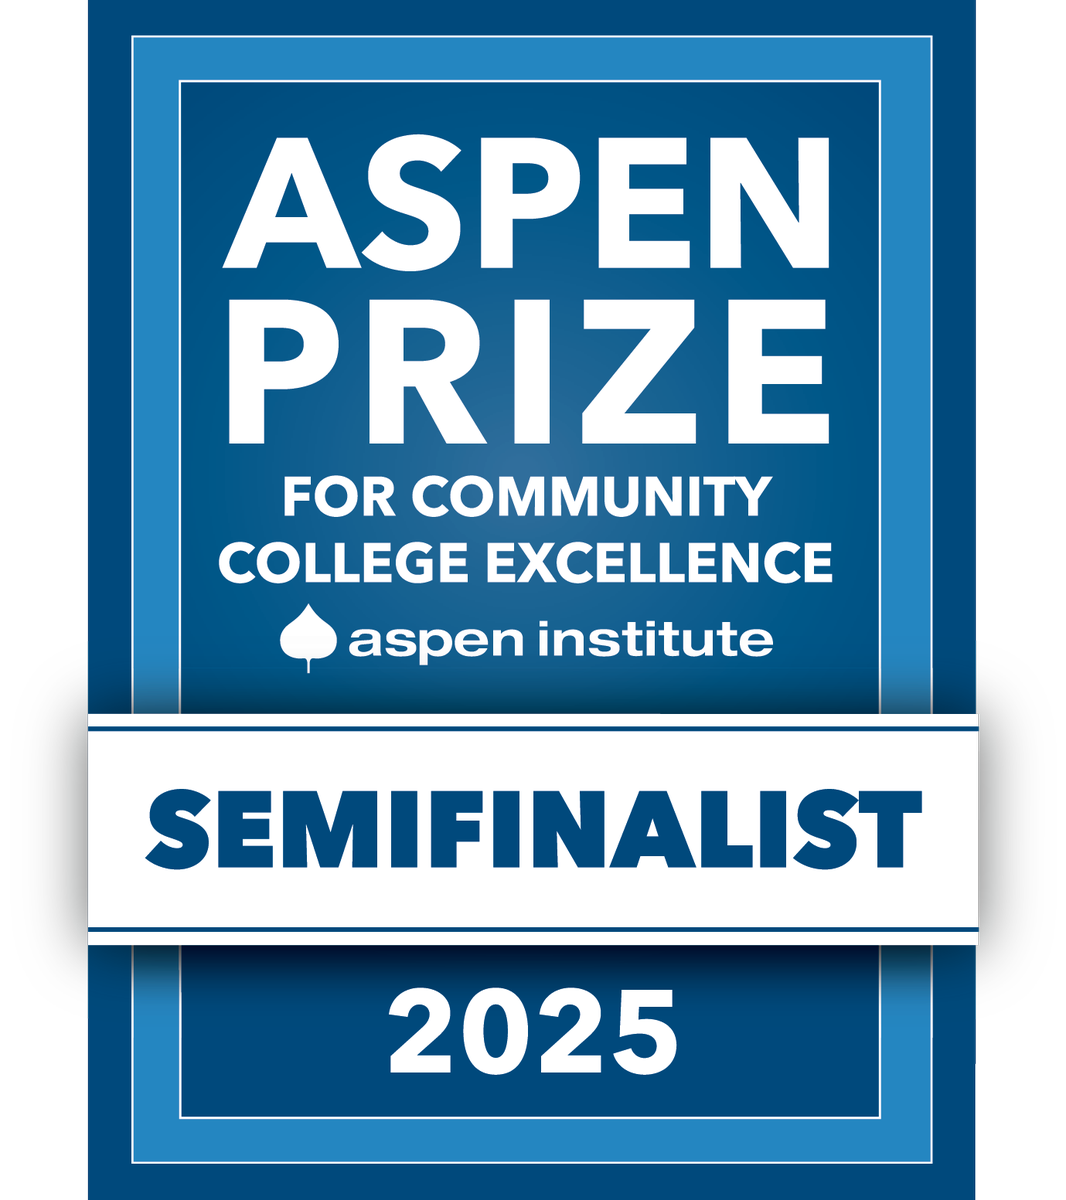 Moorpark College is proud to announce we have been selected as a semifinalist for the 2025 #AspenPrize for Community College Excellence! 🏆Check out more info about the Aspen Institute's mission support equitable student success bit.ly/3JSYbl0 @AspenHigherEd”